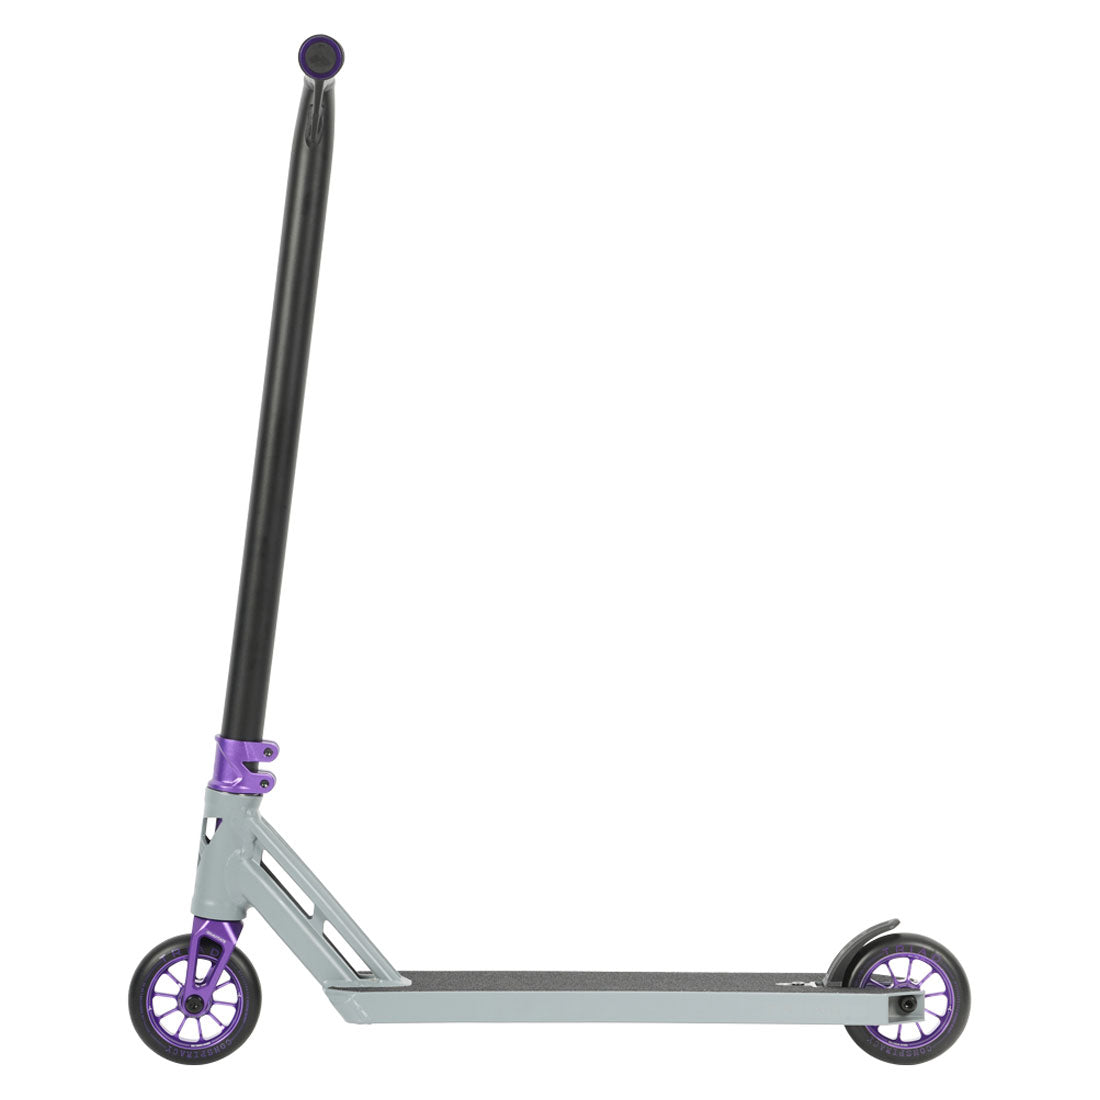 Triad C120 Condemned Complete Scooter - Grey/Purple Scooter Completes Trick